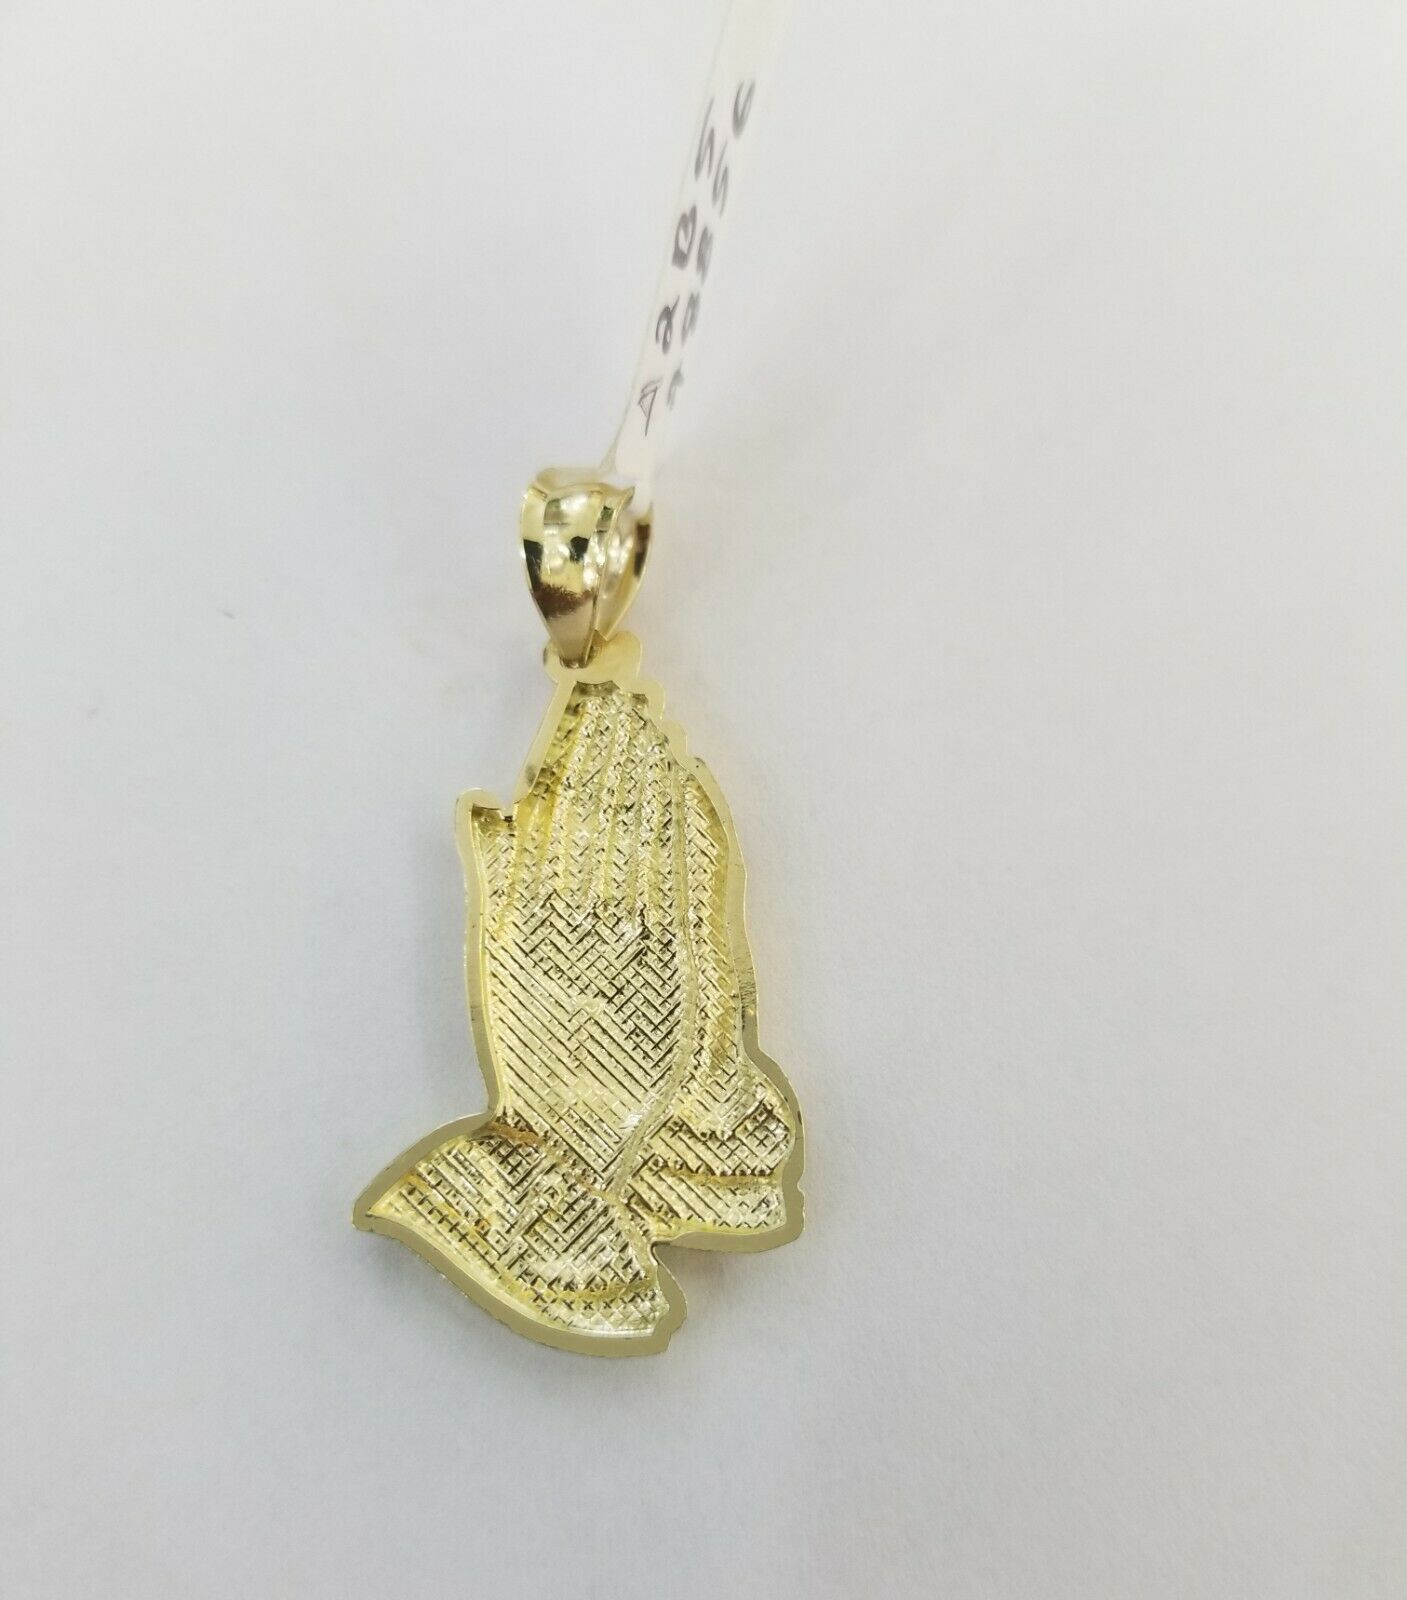 Real 10k Yellow Gold Chain & Charm Praying hand pendant , 24" 3mm Rope Necklace